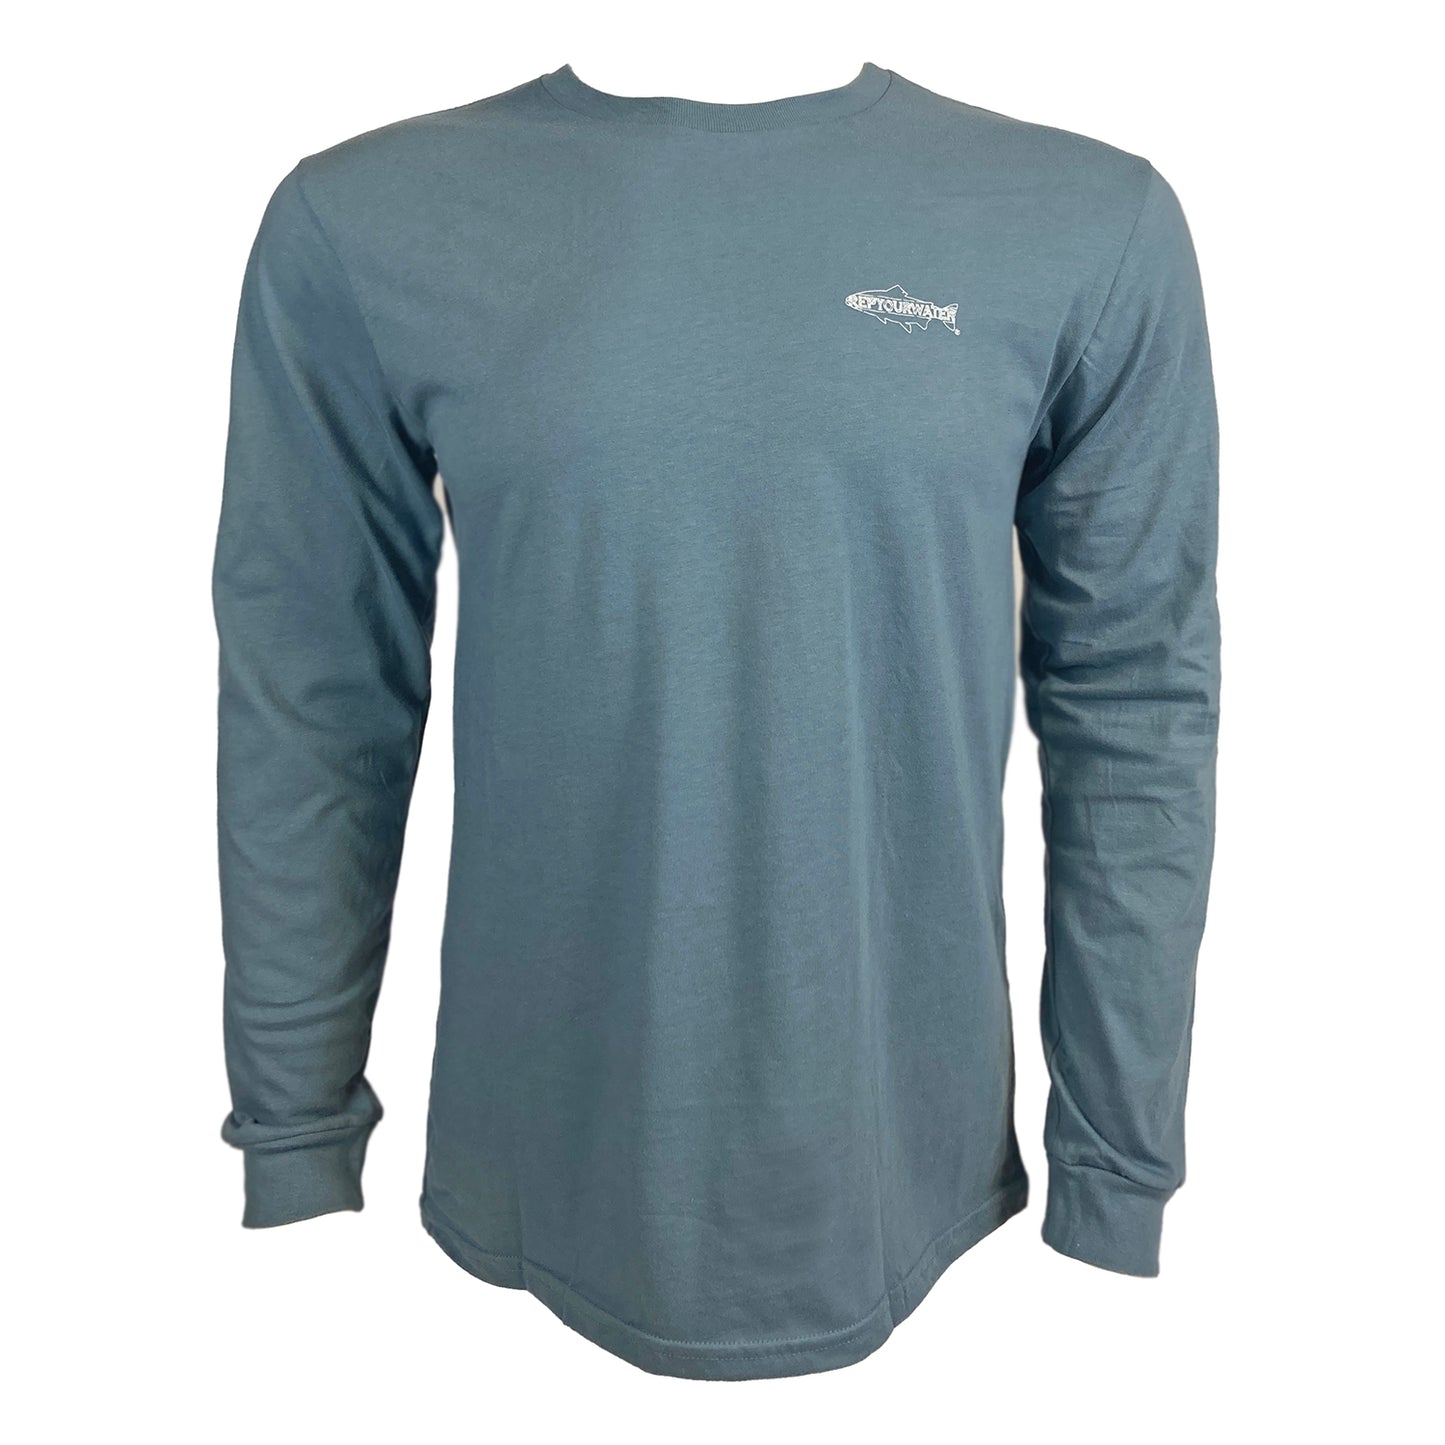 Blue gray long sleeved tee shown from the front with Rep Your Water logo on wearer's left chest.